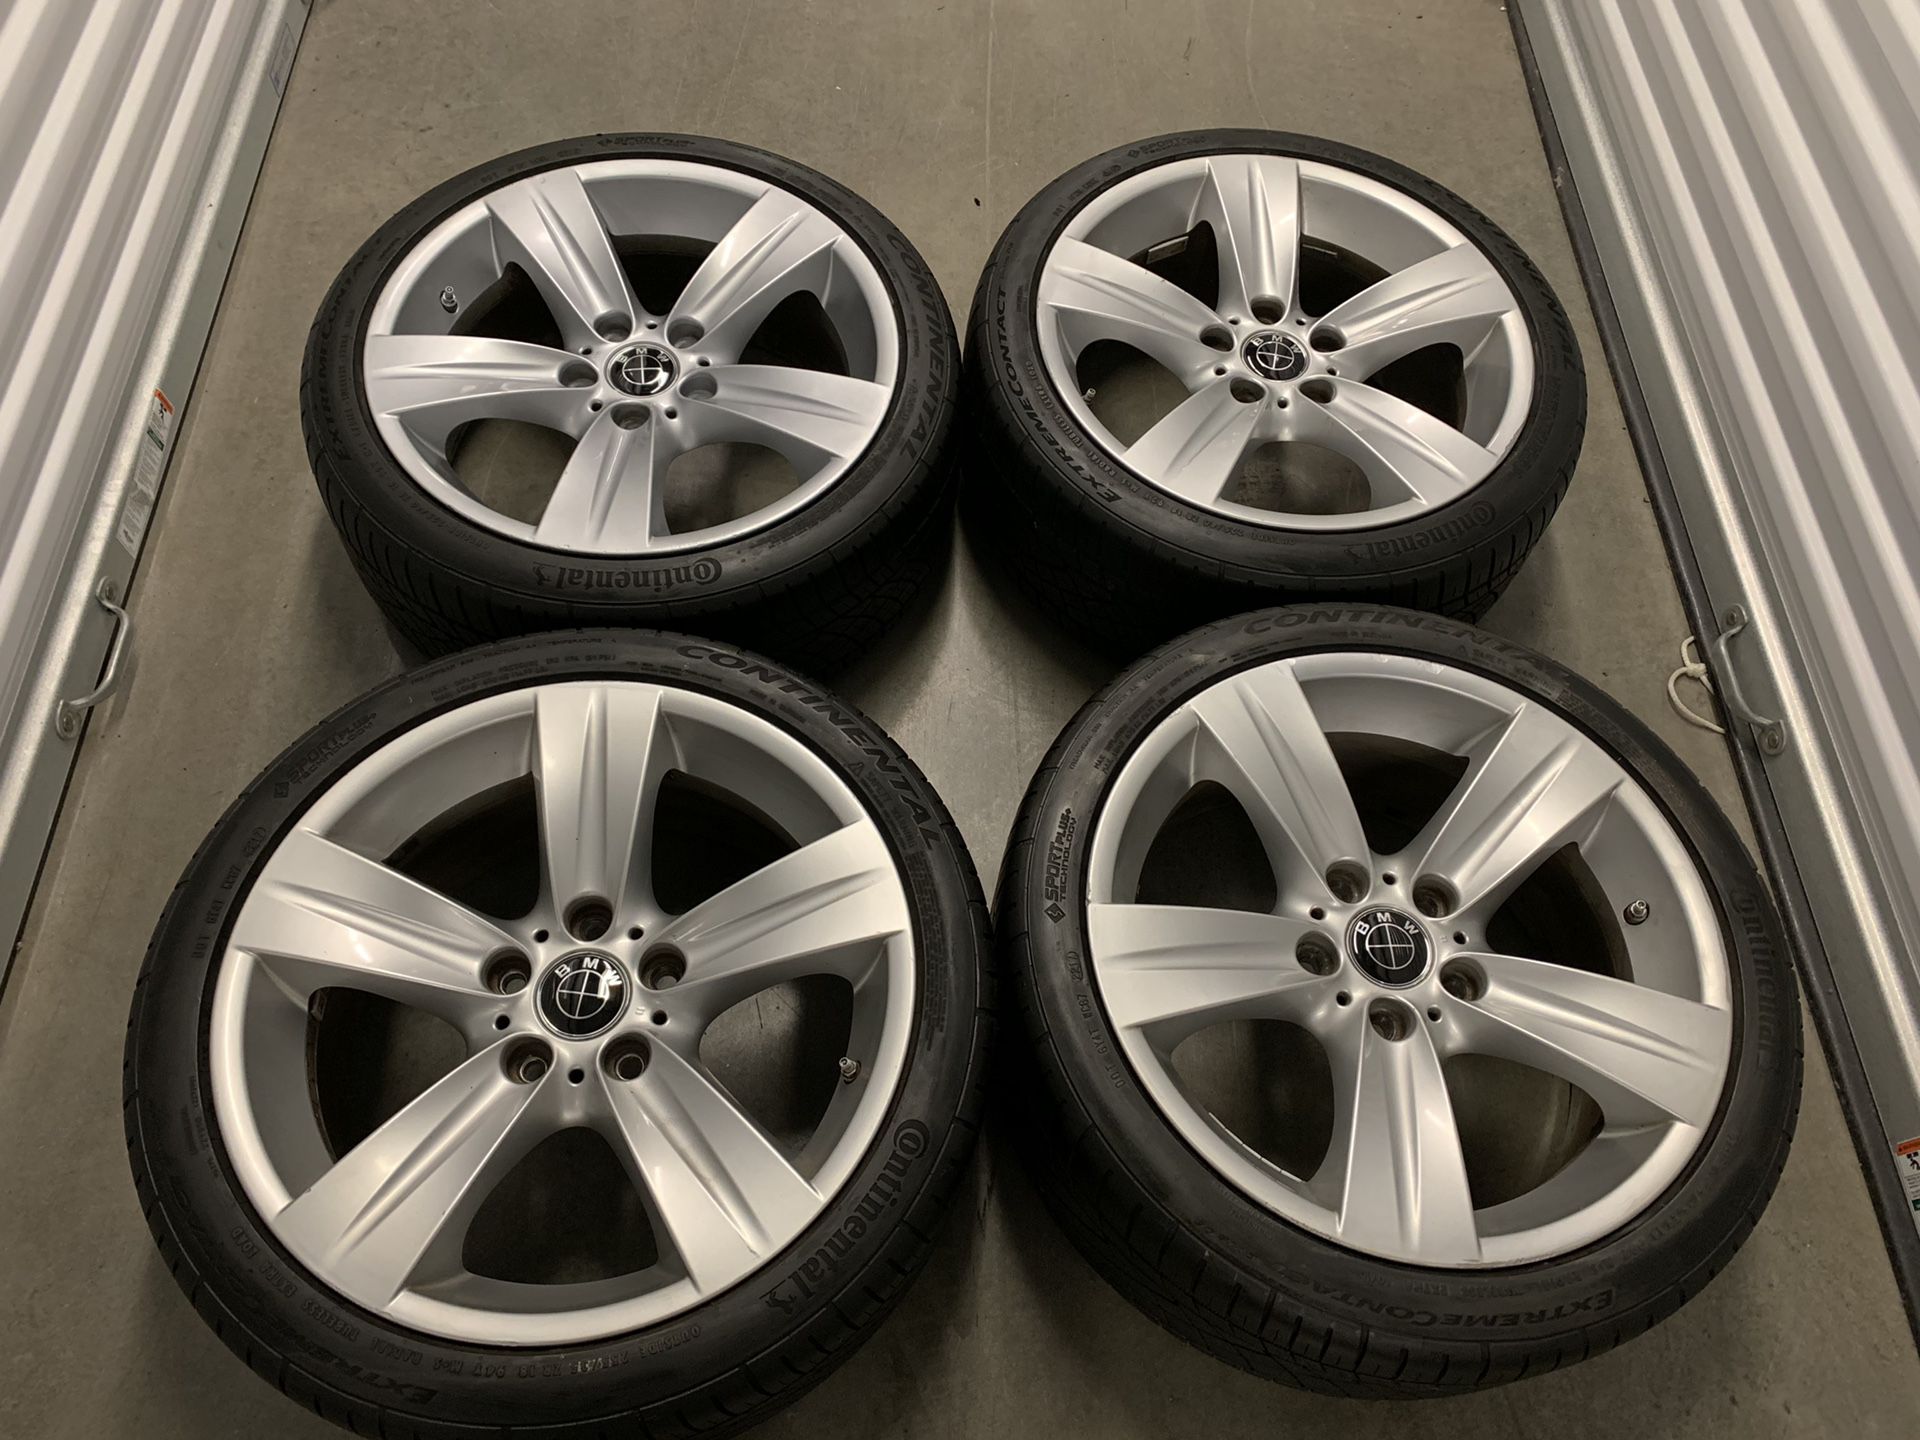 Bmw rims Staggered size 18 bolt 5x120